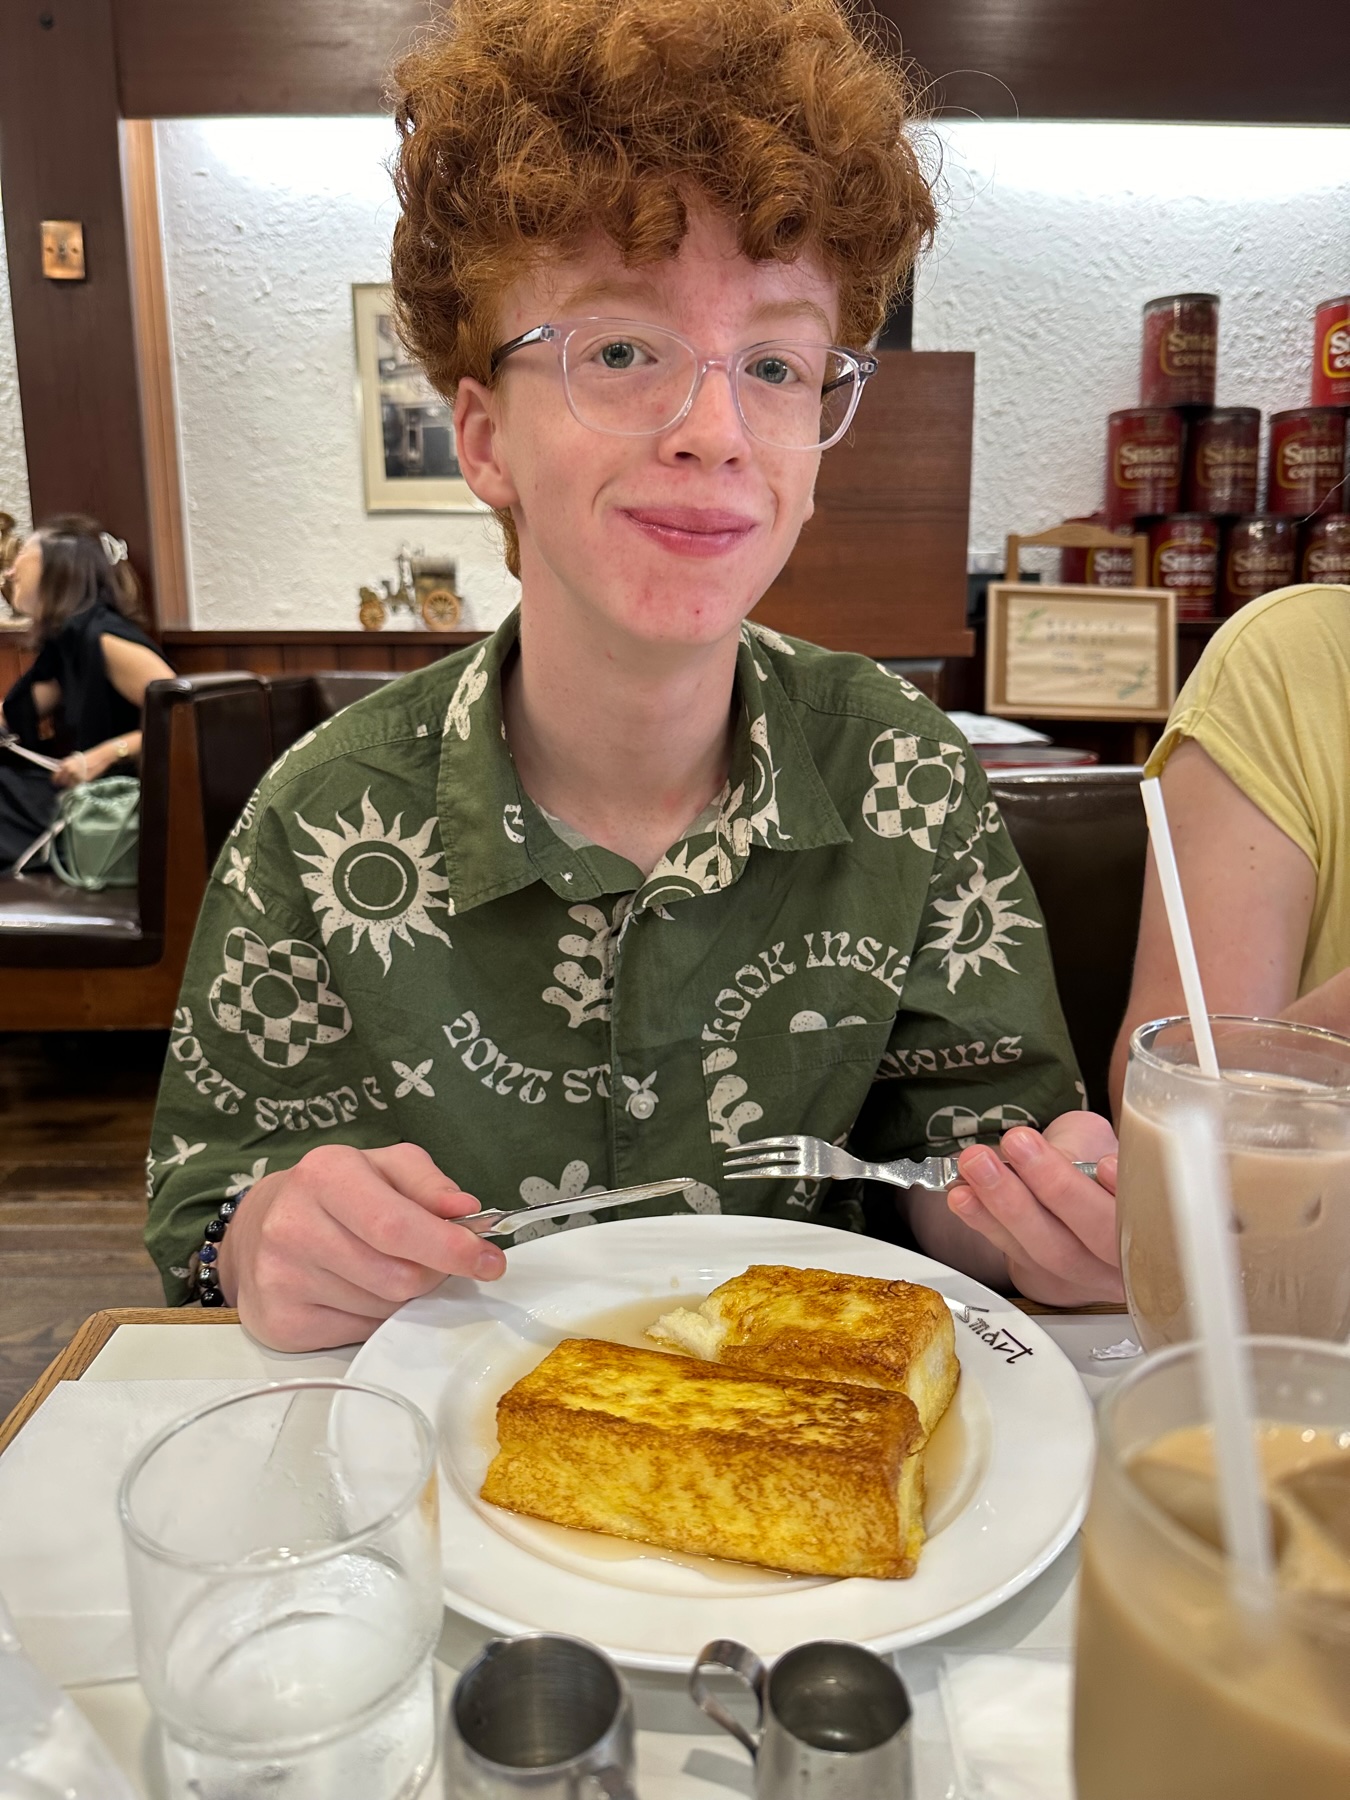 My son in front of a plate of large thick french toast